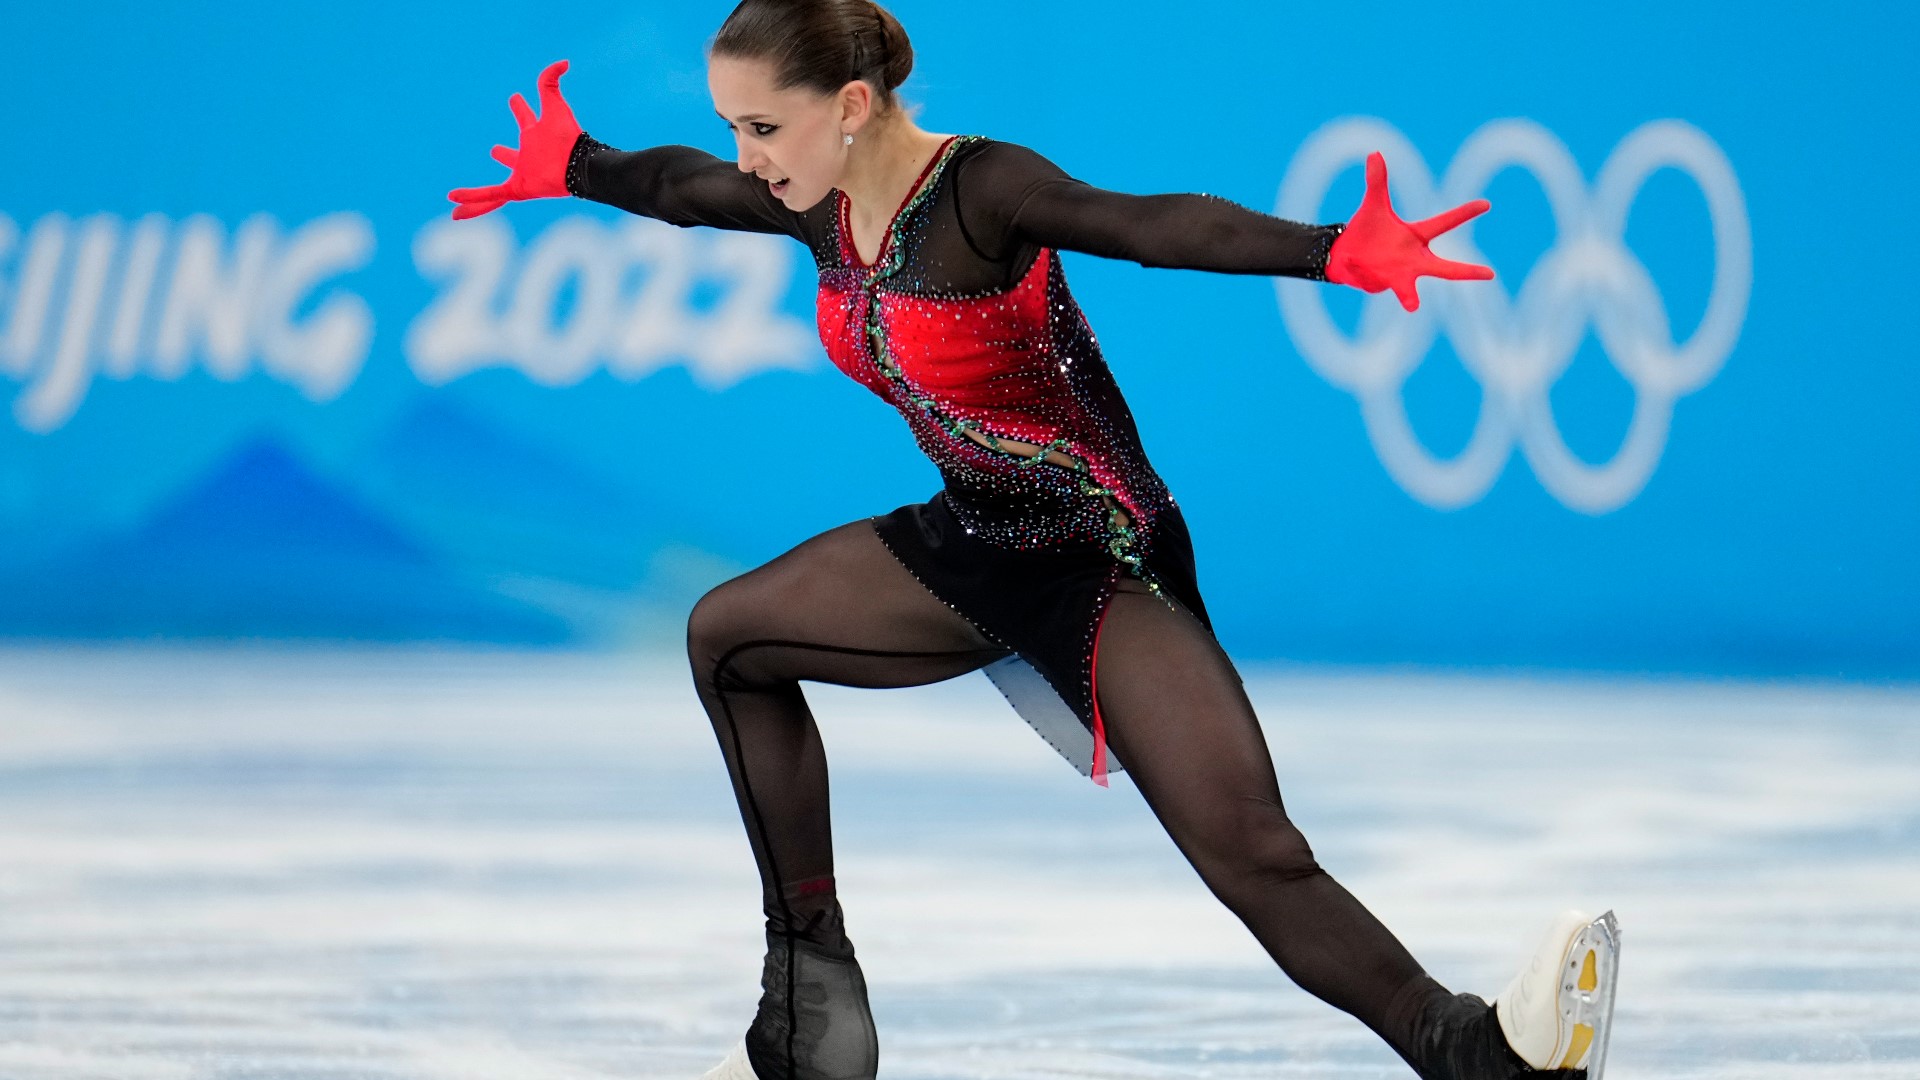 Womens figure skating competition kicks off Tuesday at Olympics cbs19